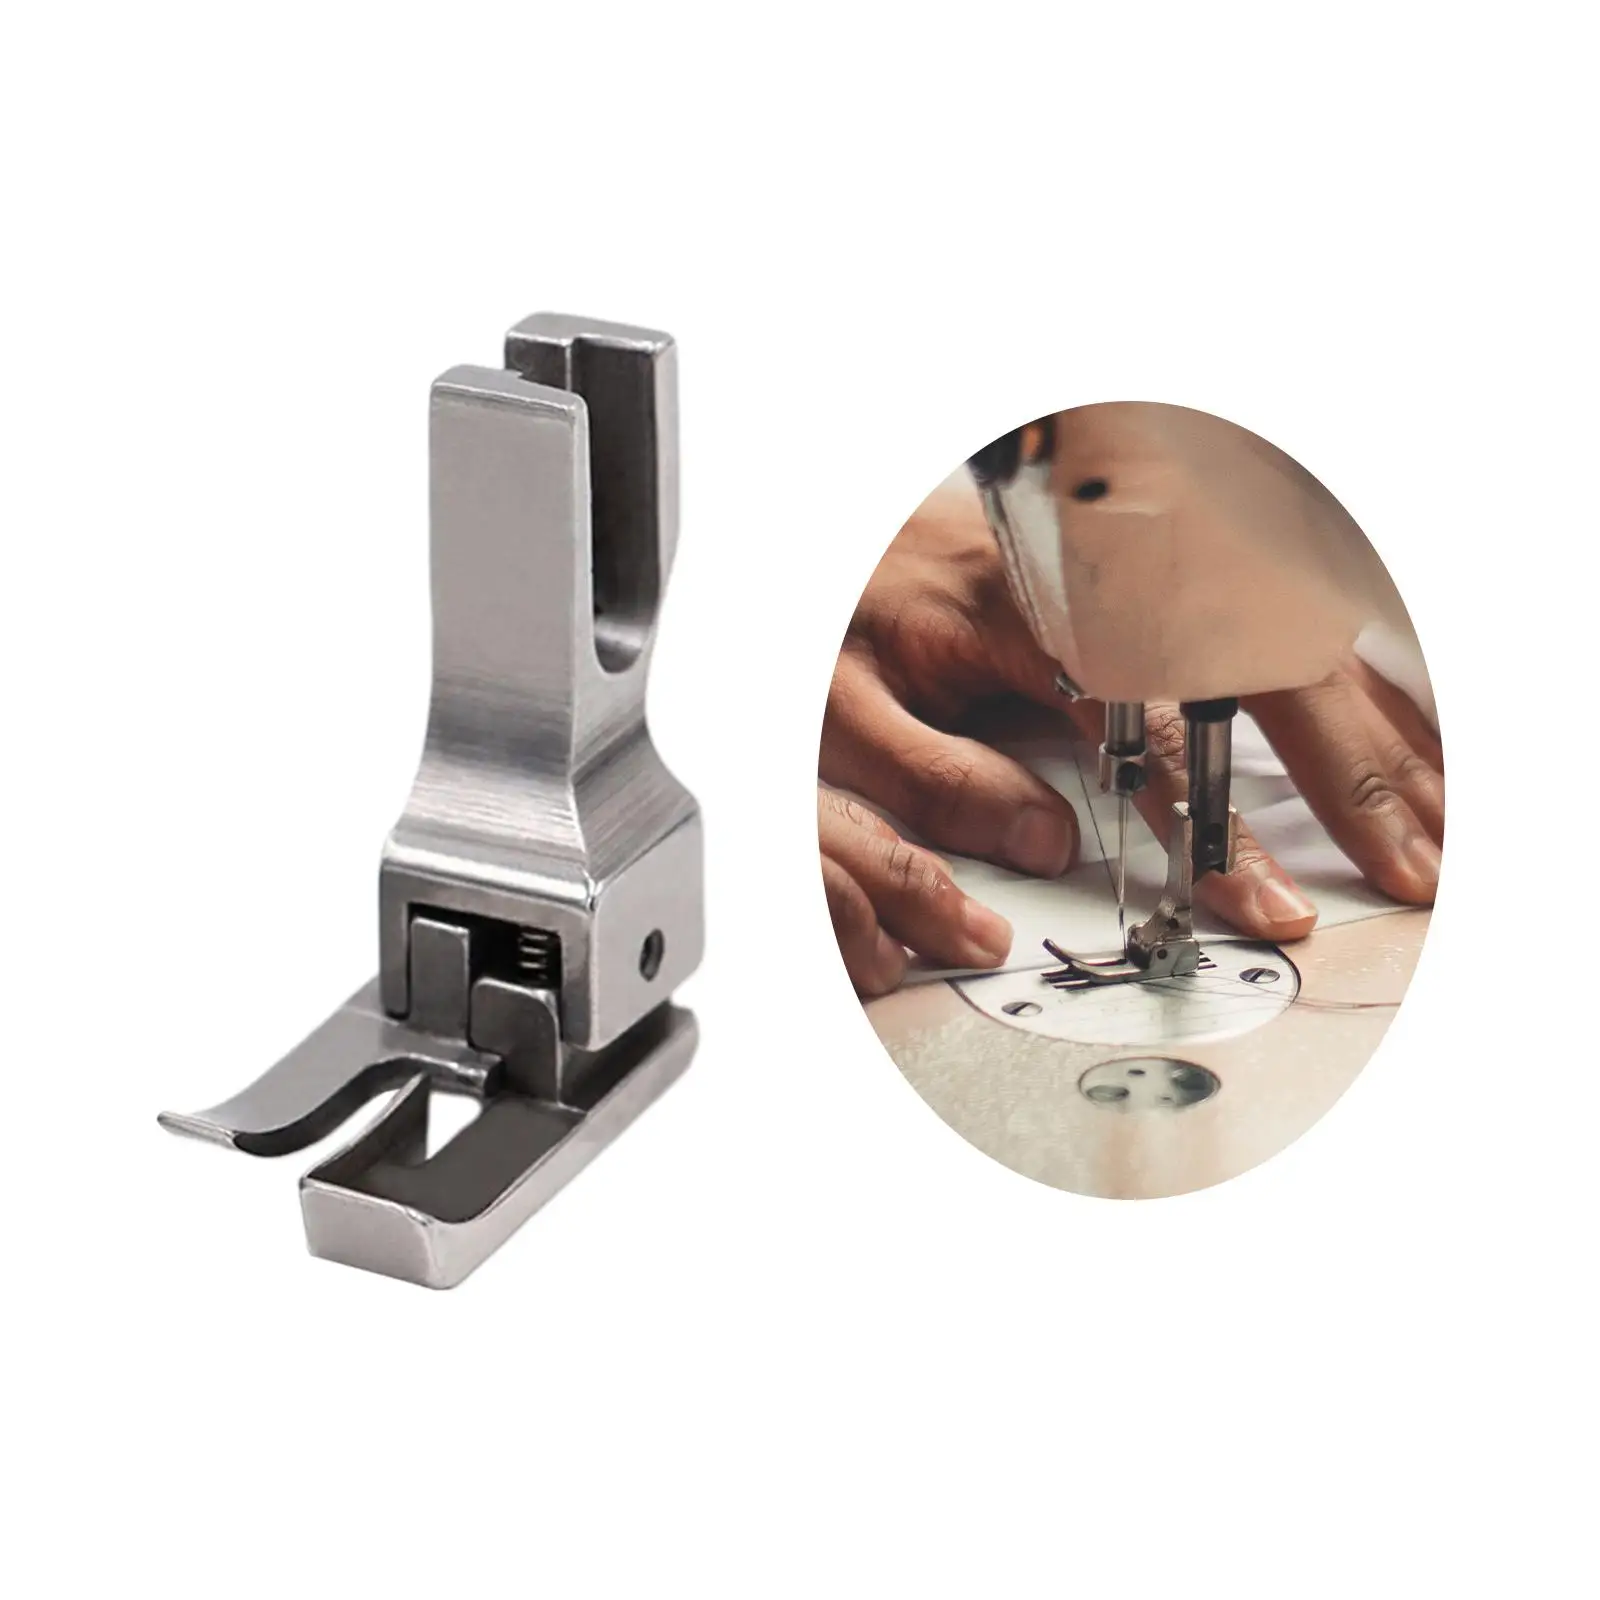 Presser Foot for Sewing Machine Quilting Presser Foot for DIY Arts Crafts Leather Crafts Sewing Apparel Clothes Collar Sewing